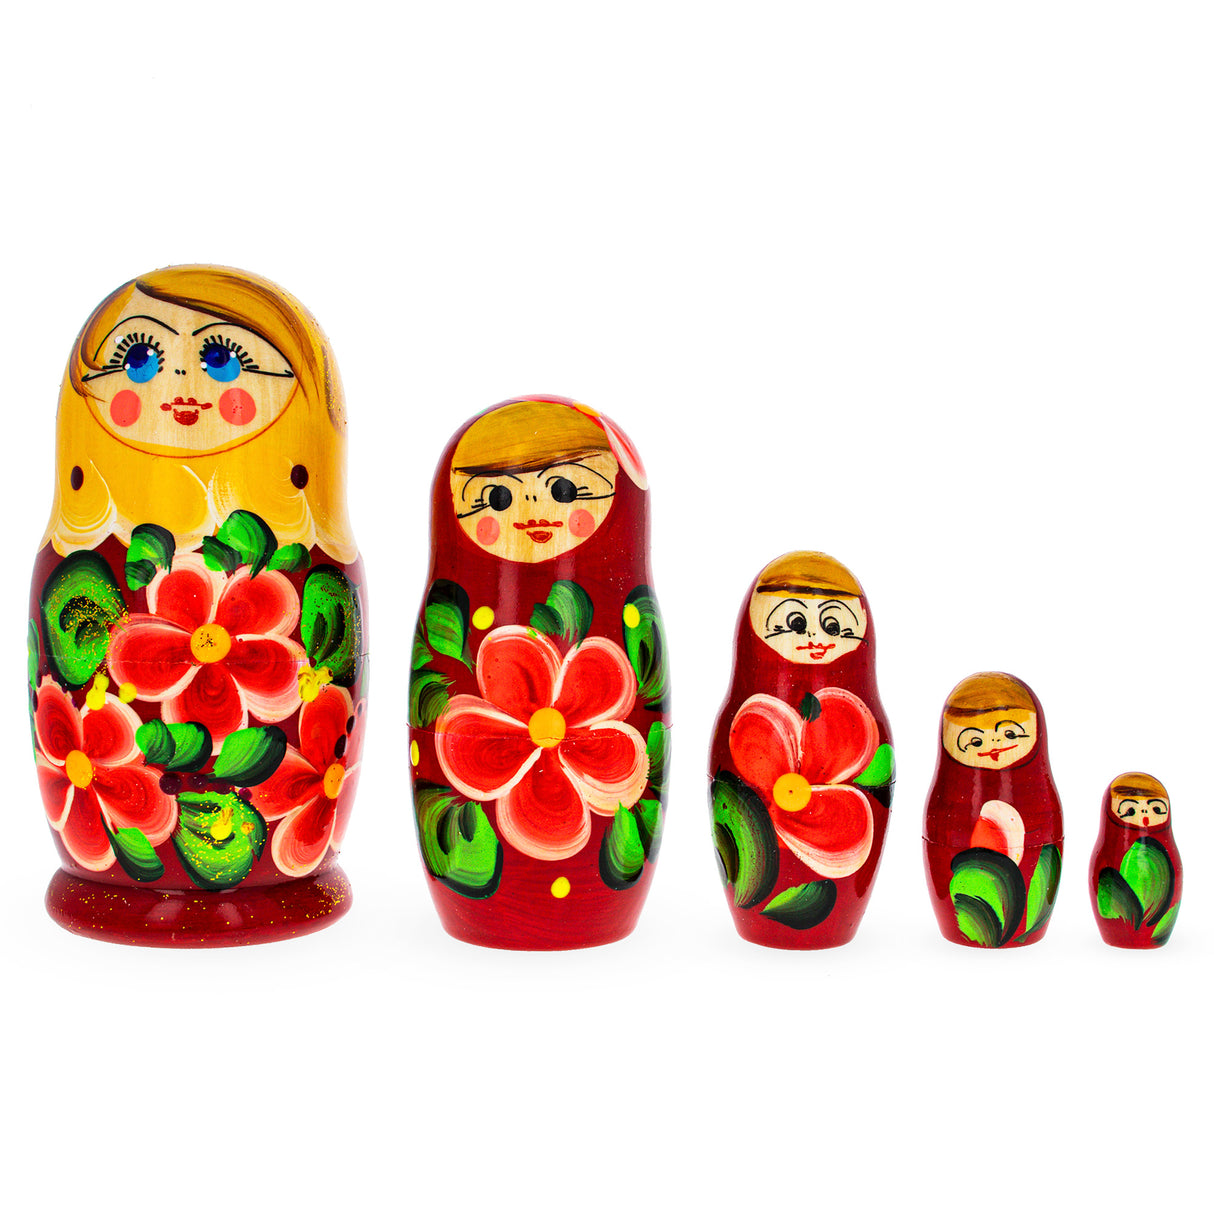 Wood Beautiful Wooden  with Orange Color Hood and Flowers Nesting Dolls in Red color